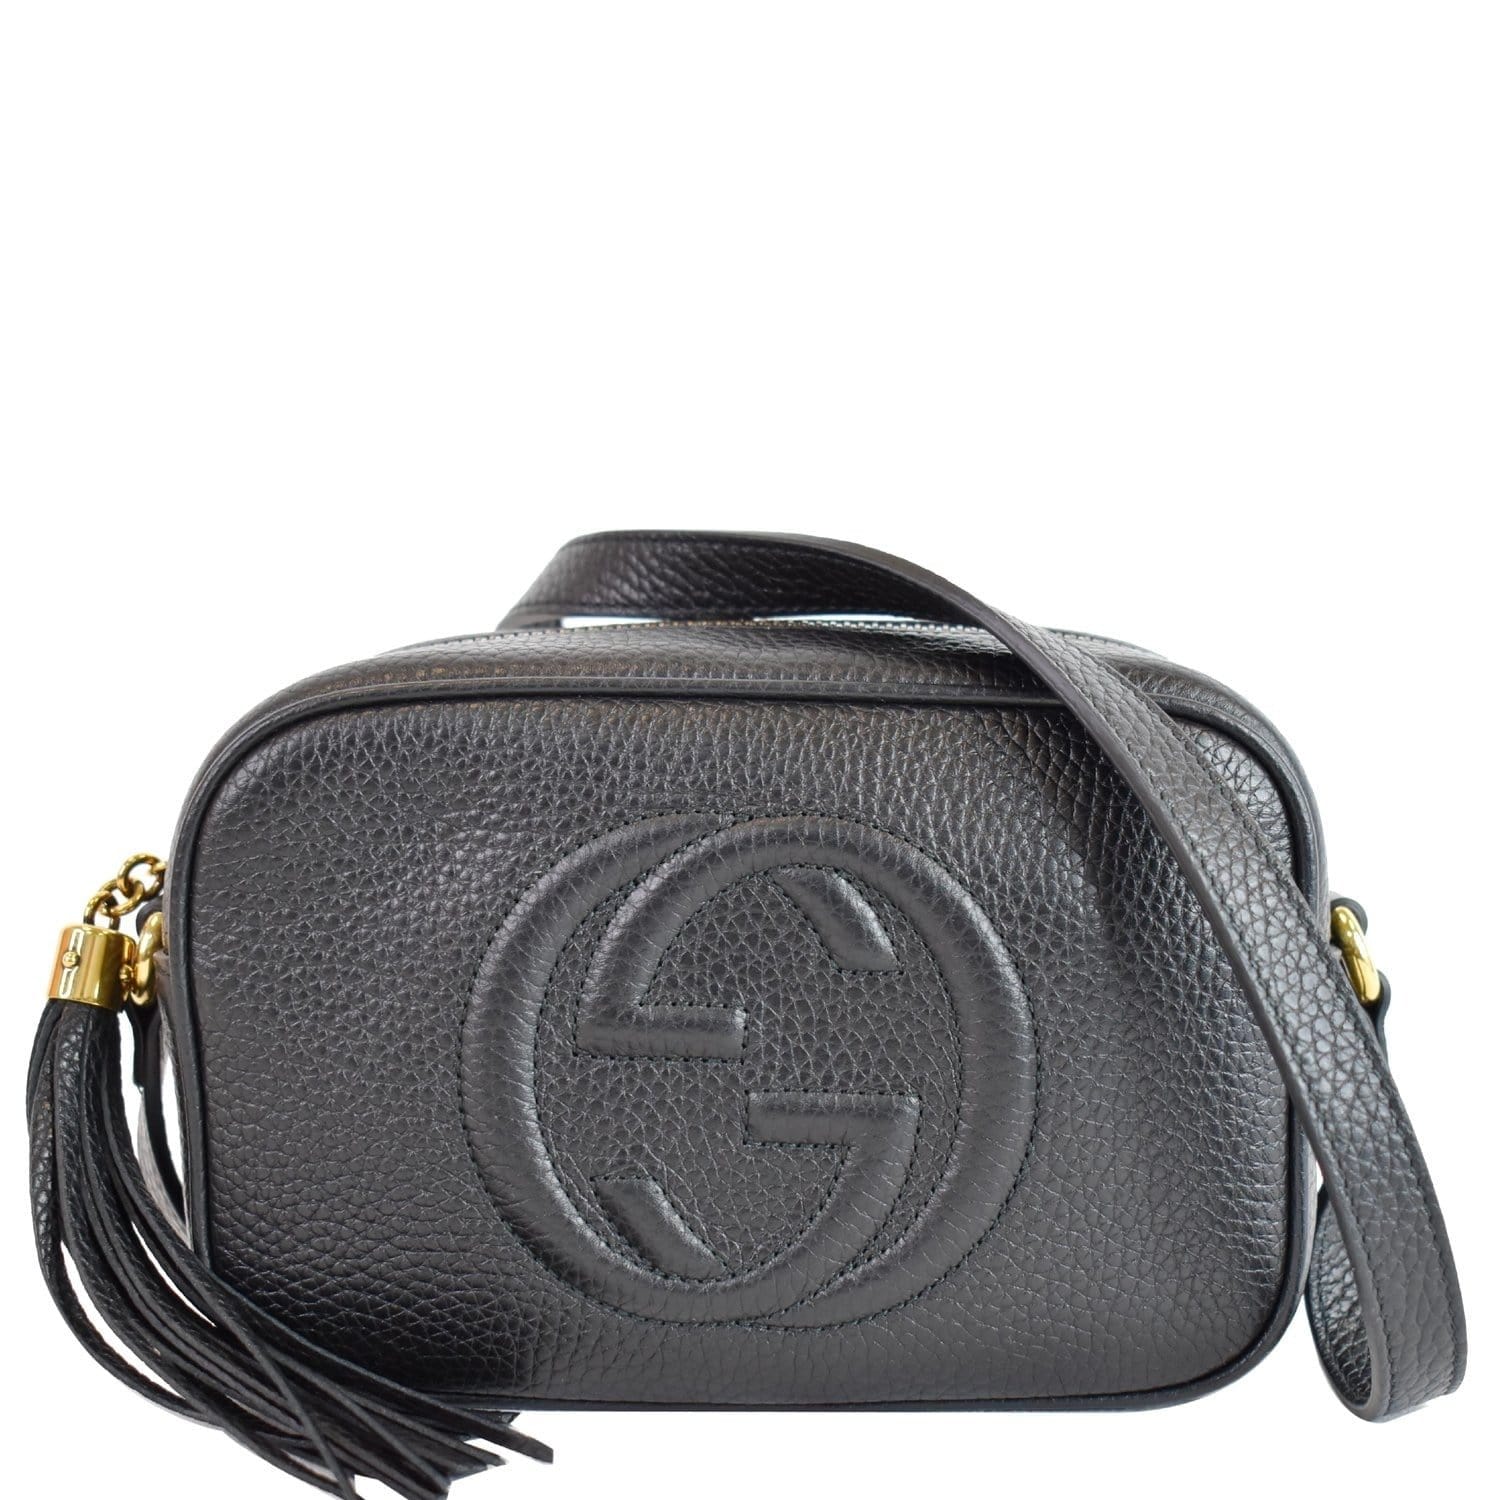 Louis Vuitton Soho Disco Small Pebbled Leather Bag - DDH